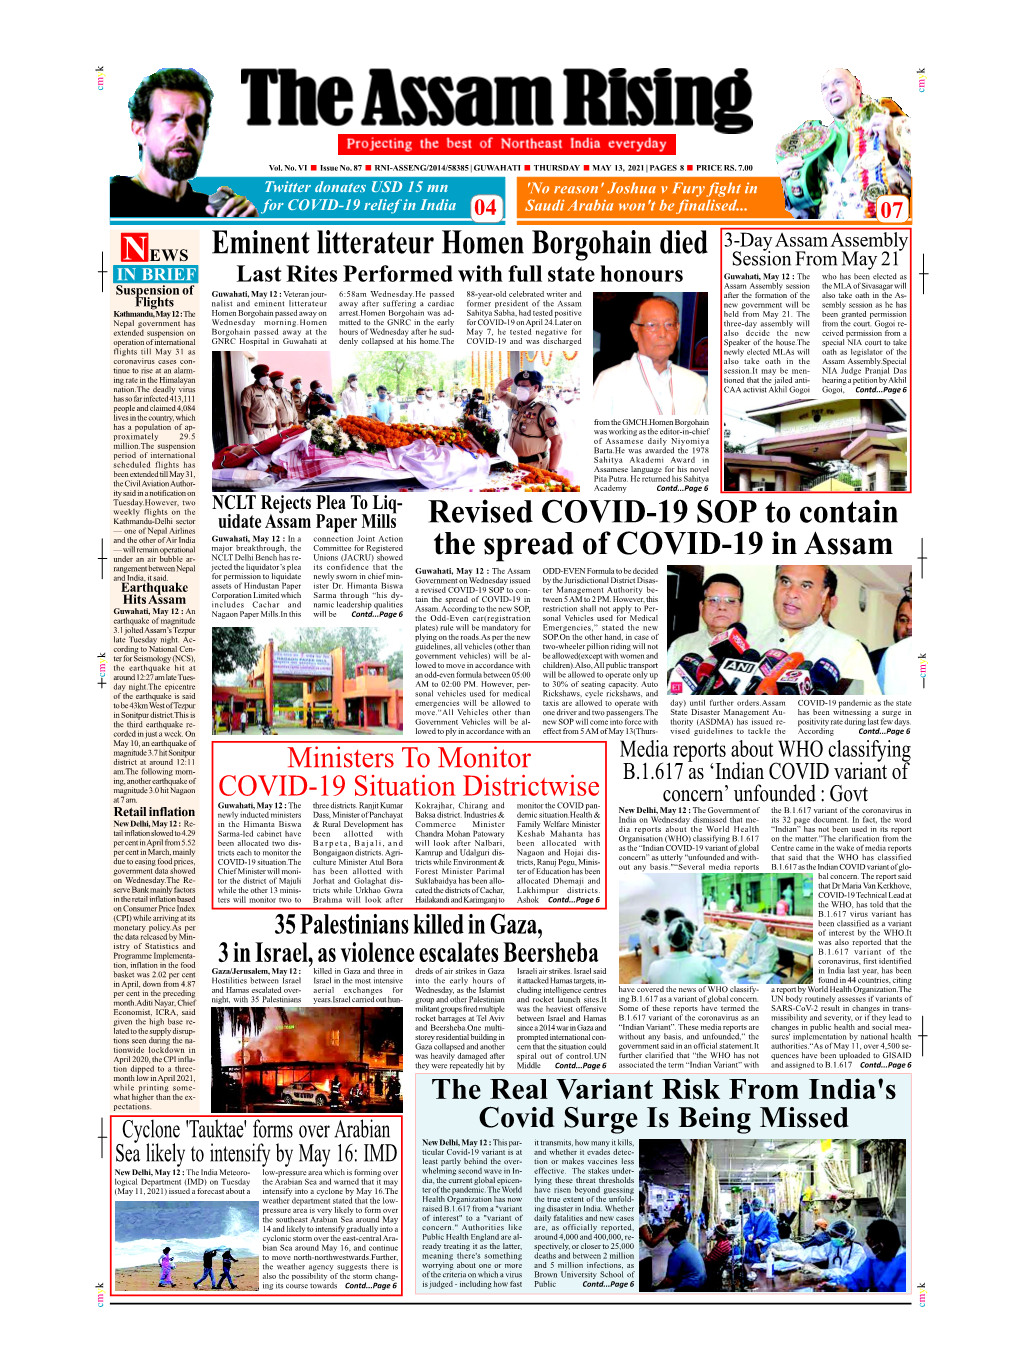 AR-P-1 February 08 (Front Page)